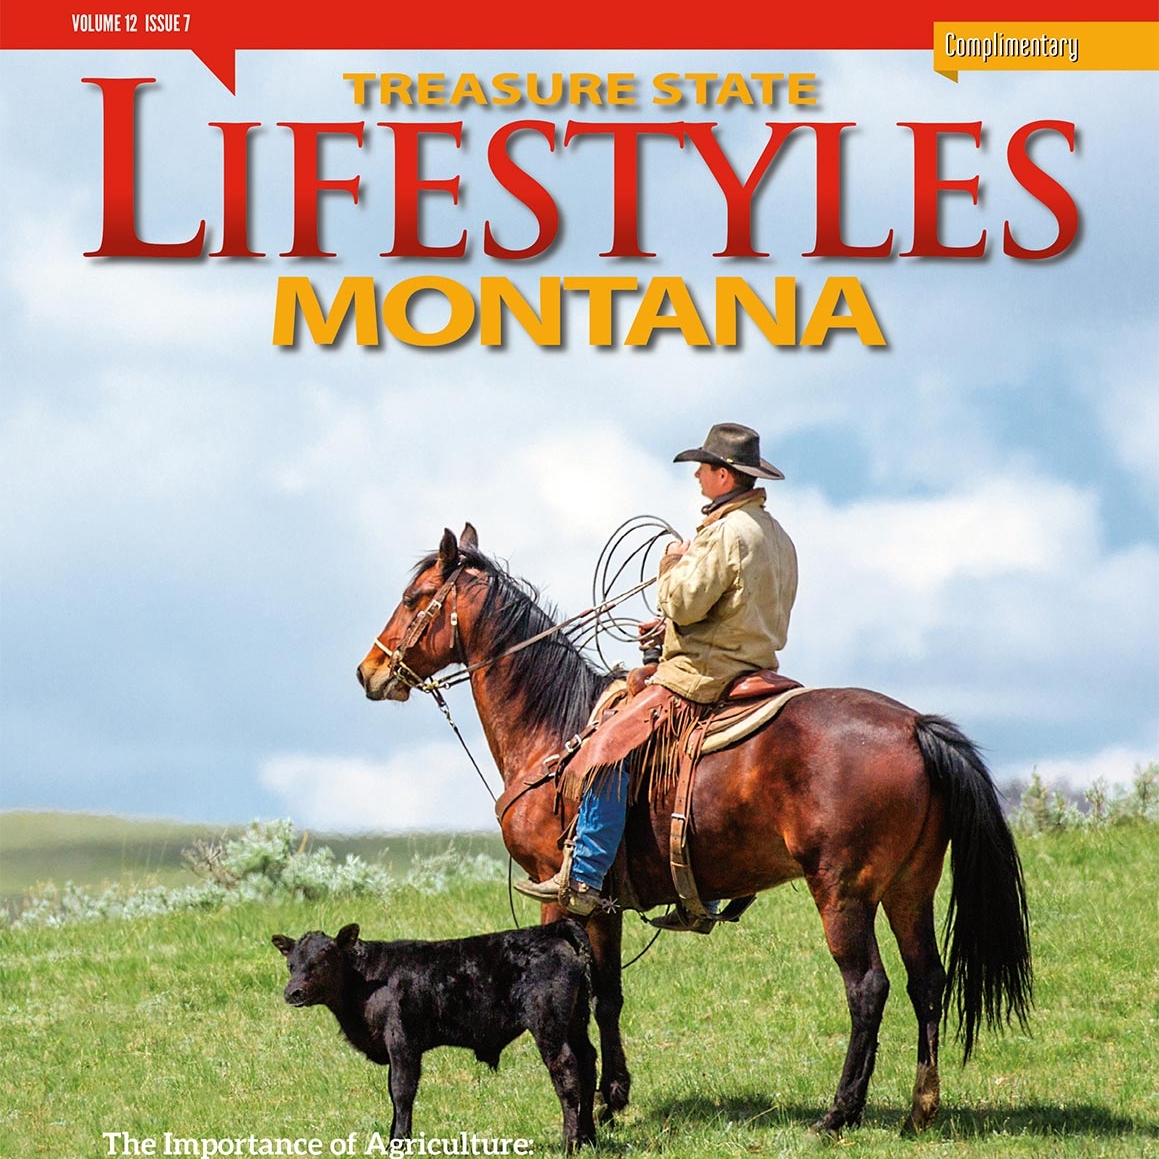 Published on cover and inside Montana Lifestyles magazine